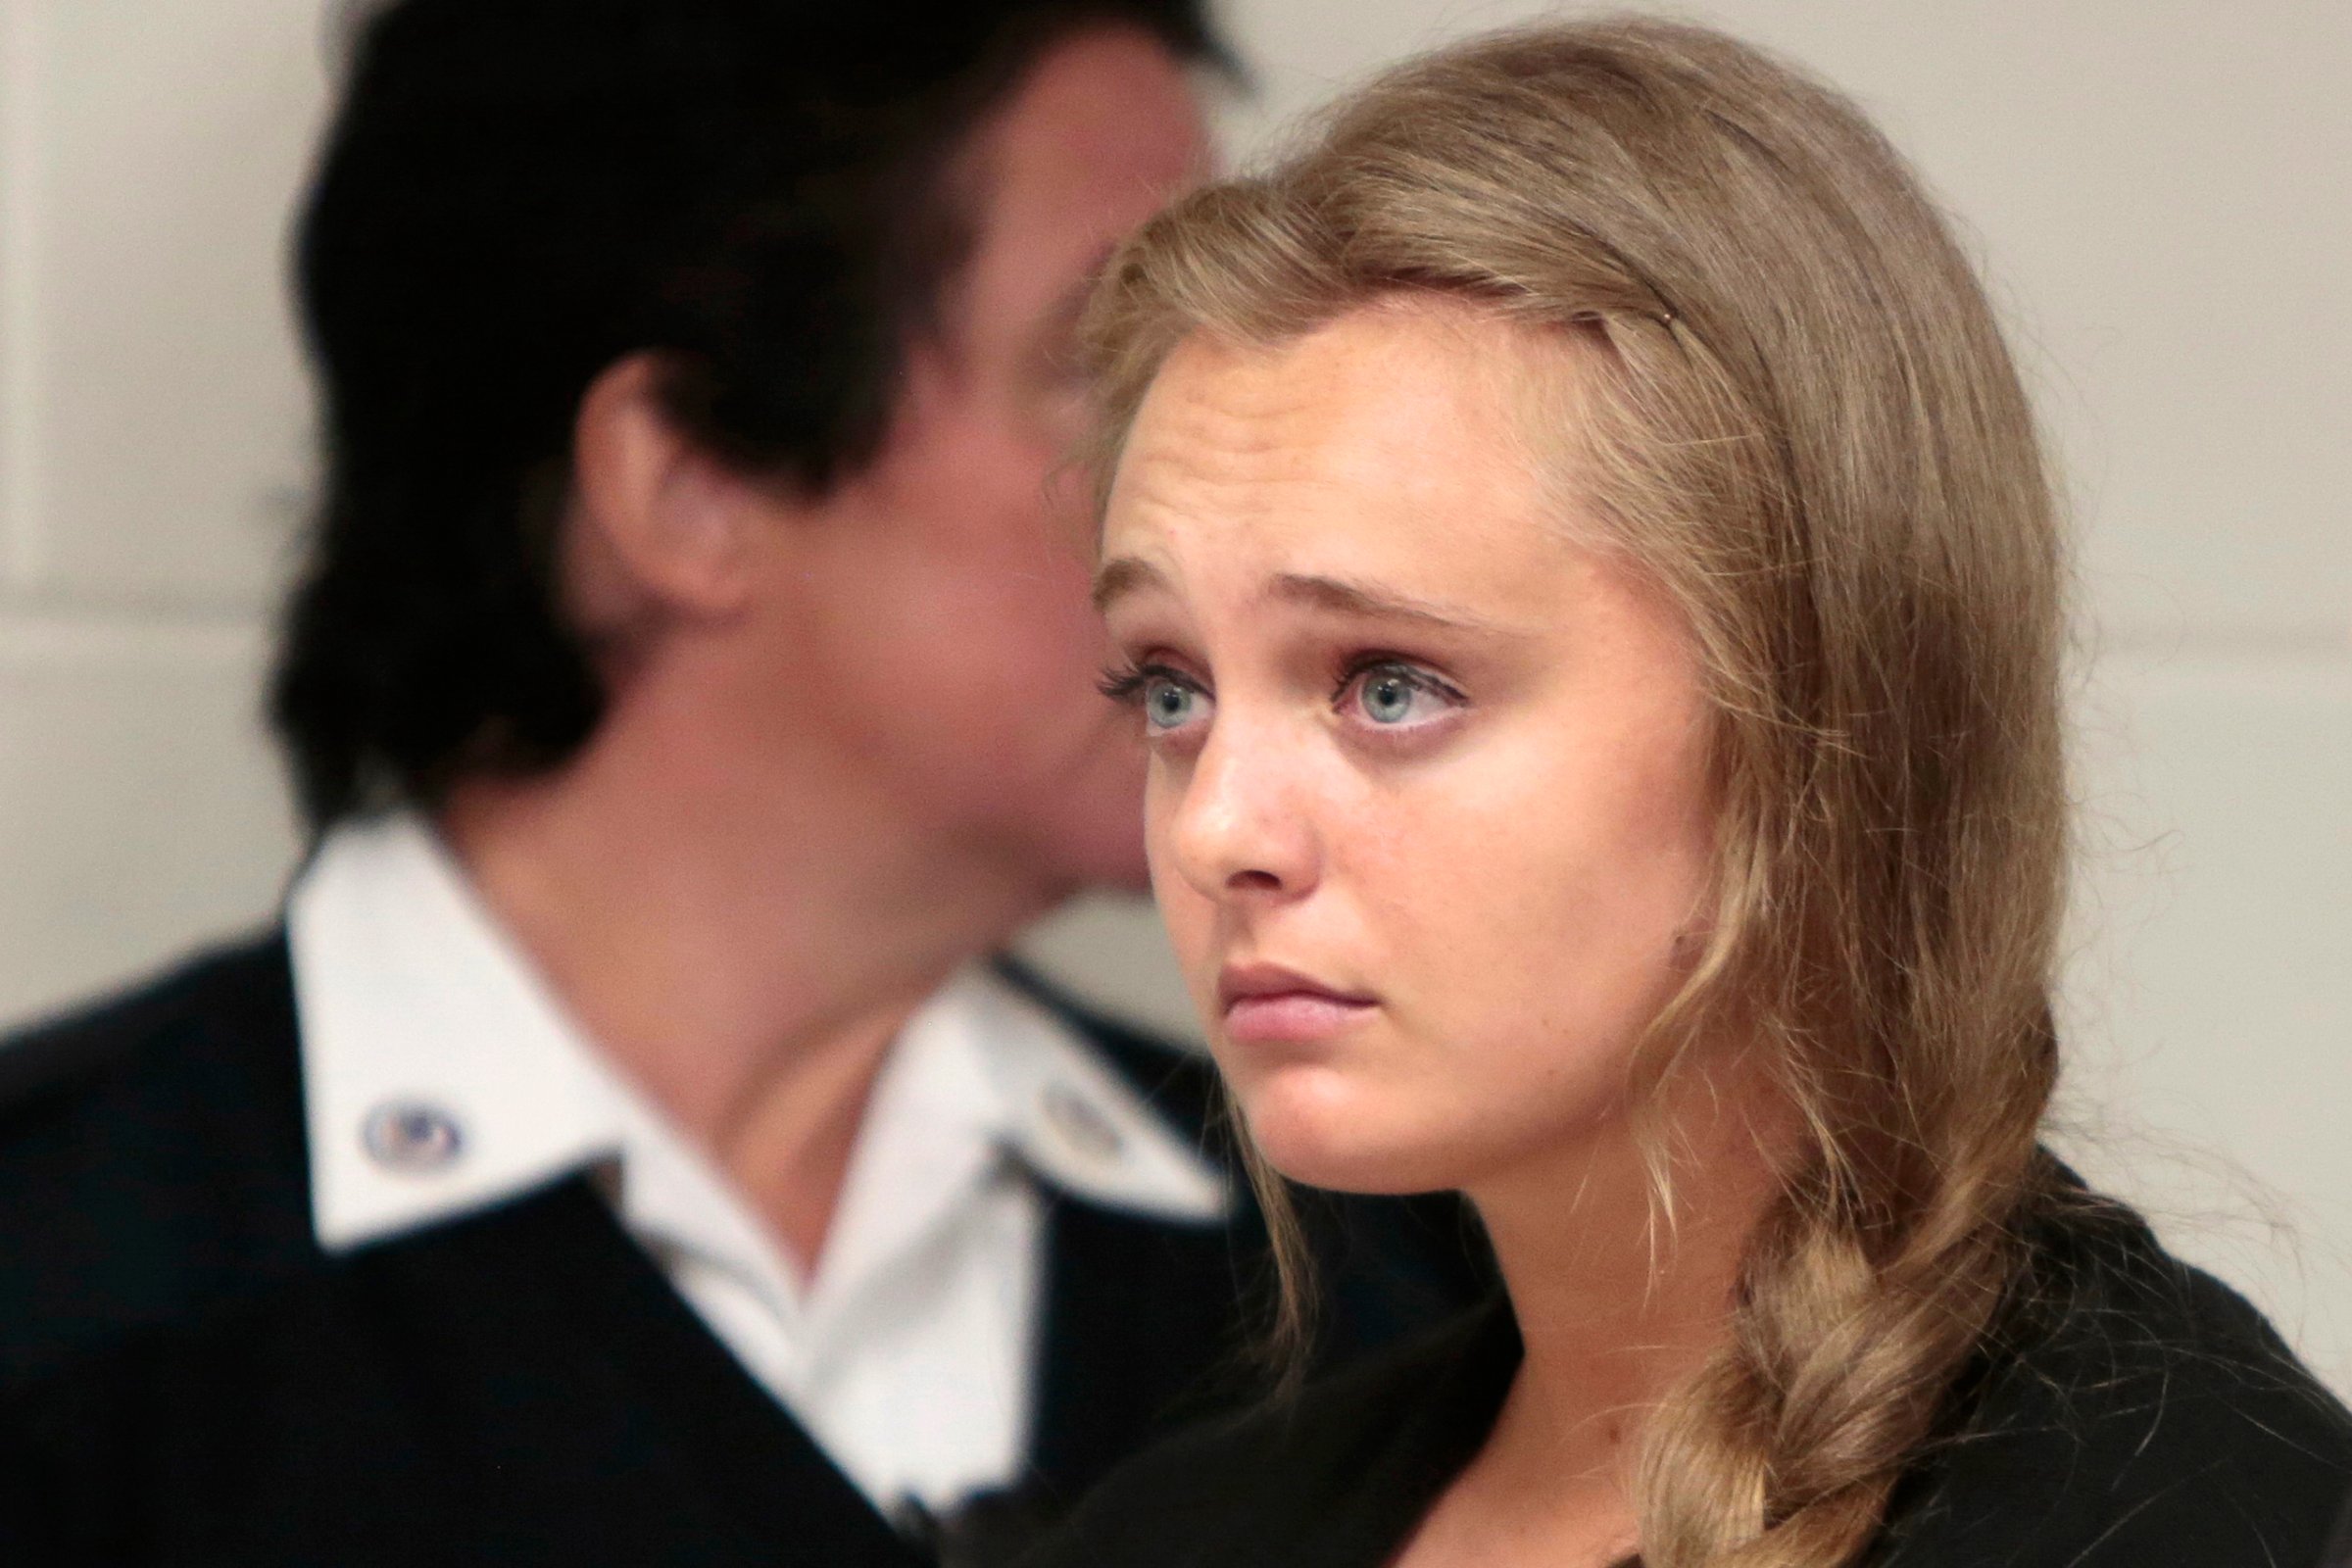 Michelle Carter listens to her defense attorney argue for an involuntary manslaughter charge against her to be dismissed at Juvenile Court in New Bedford, Mass. on Aug. 24, 2015.